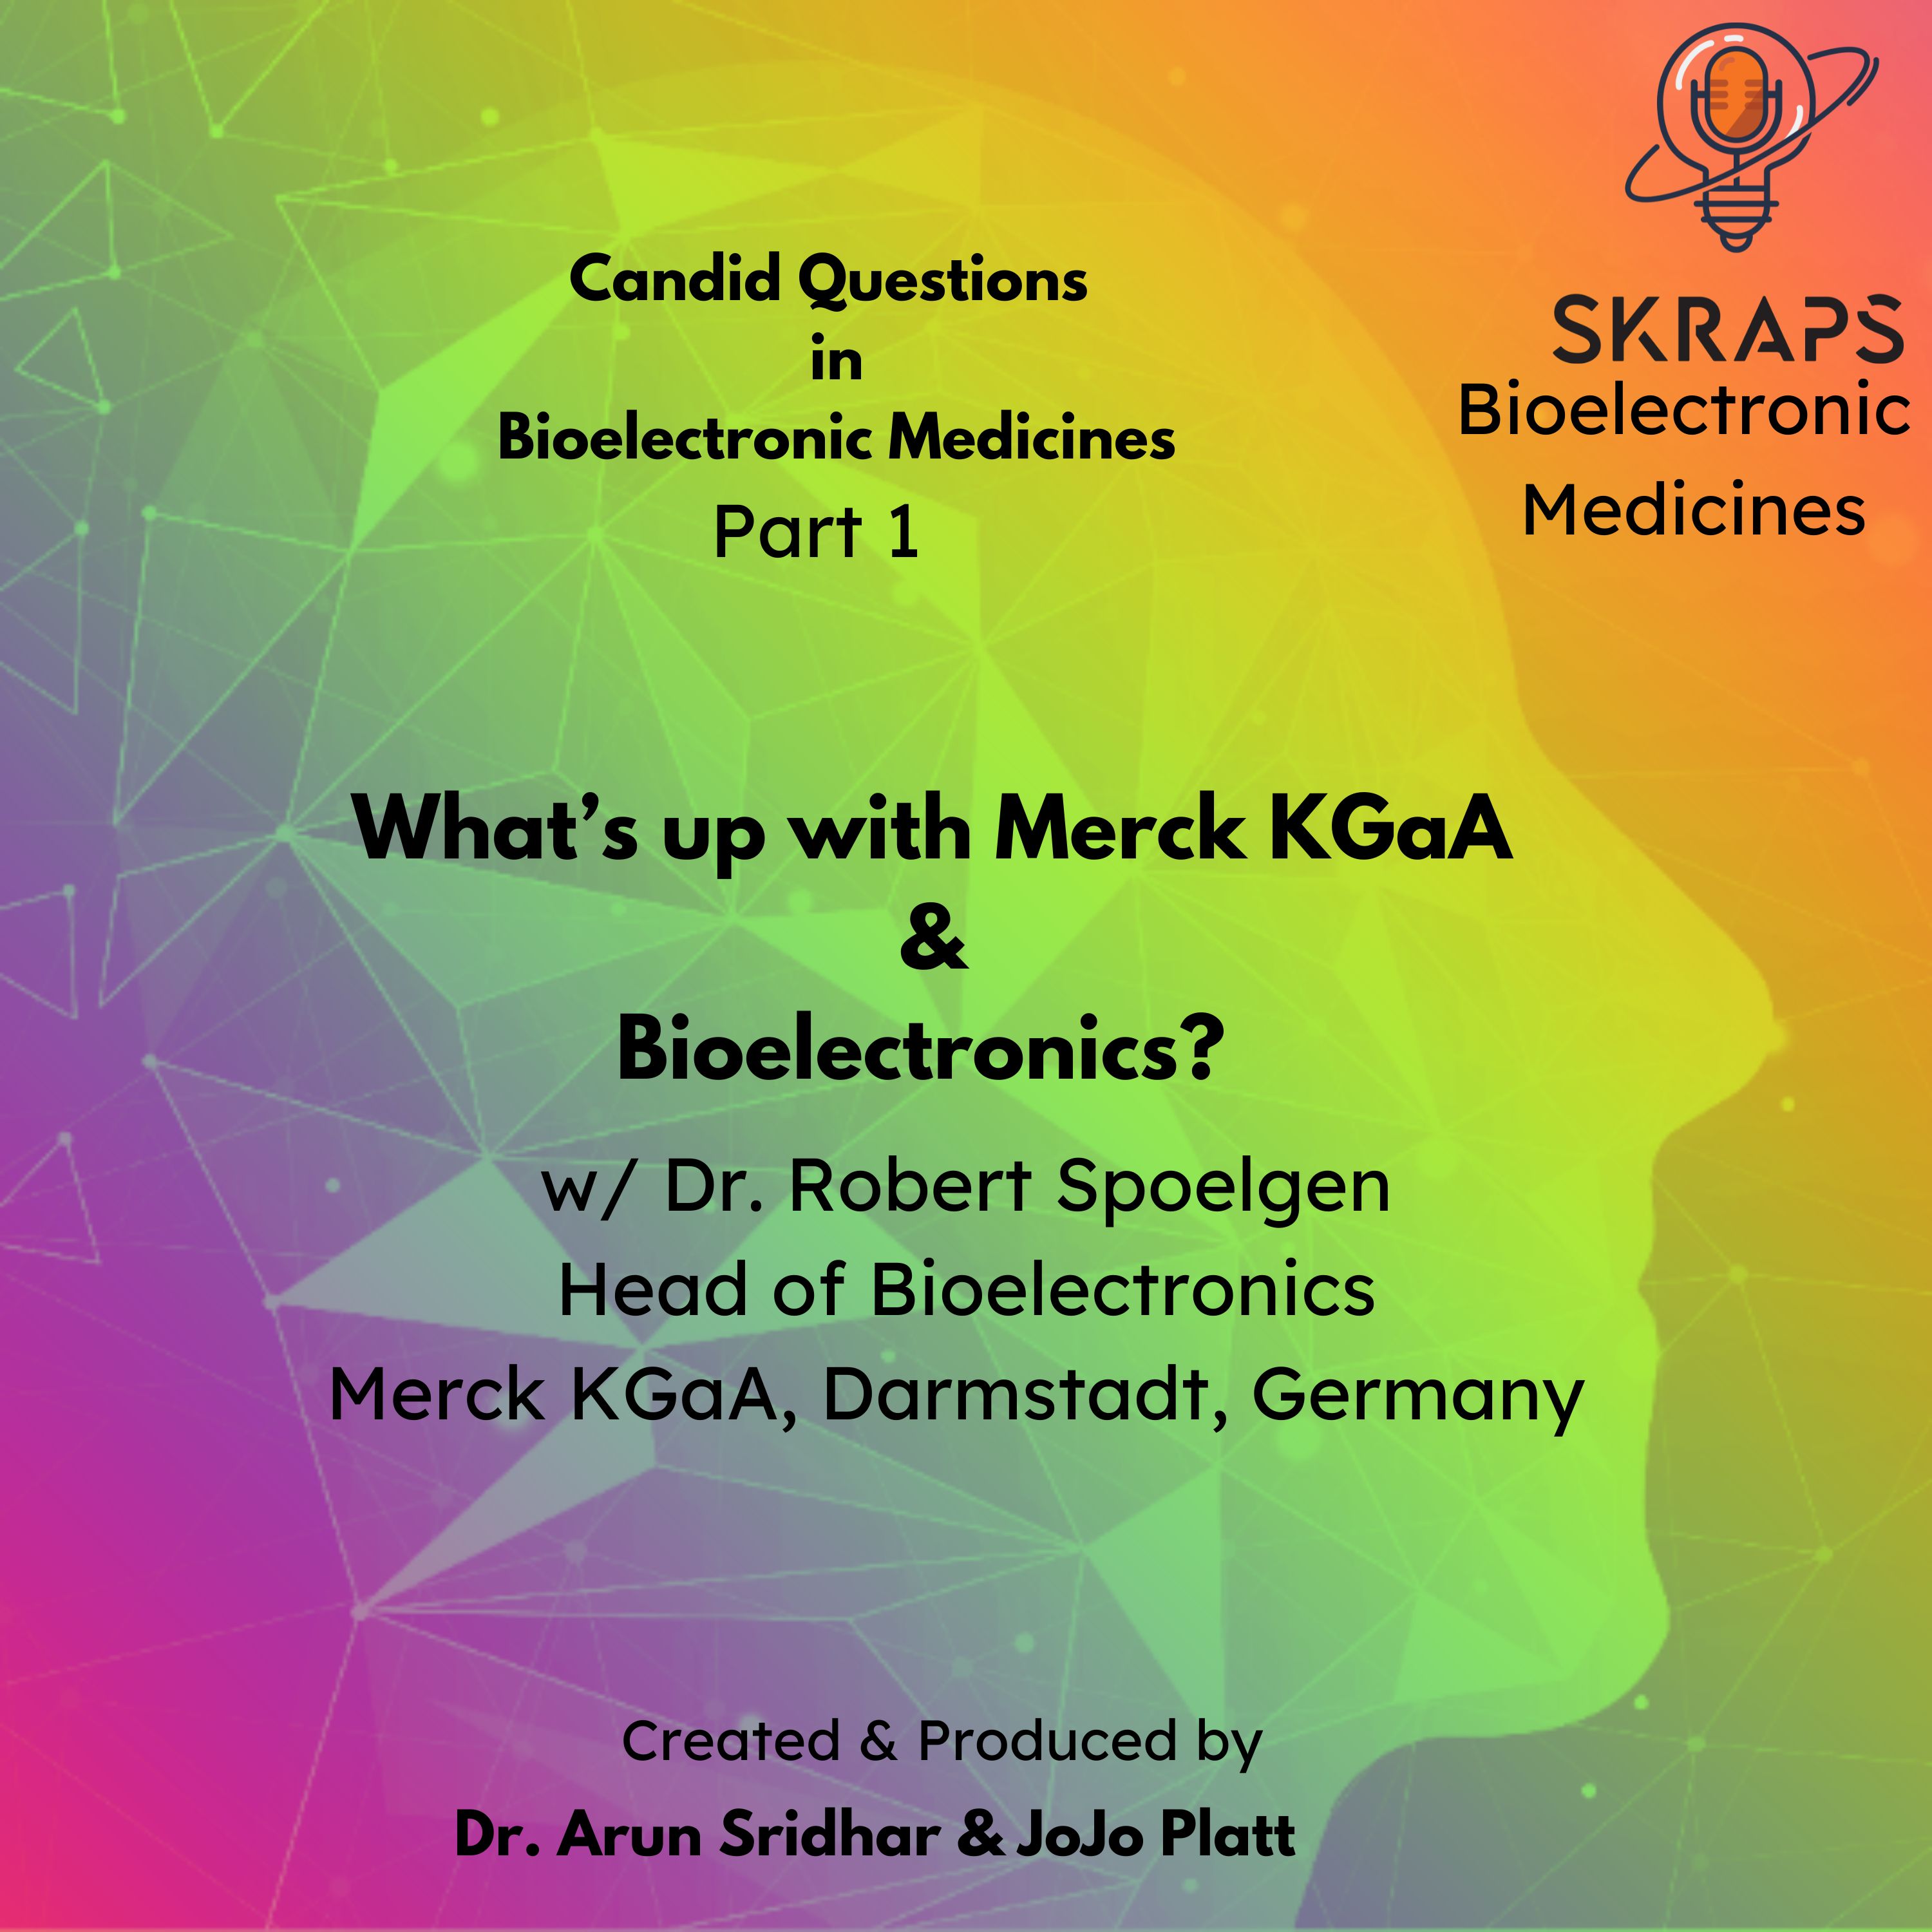 Why did Merck KGaA venture into Bioelectronics? - Candid Question in Bioelectronic Medicines (Part 1)